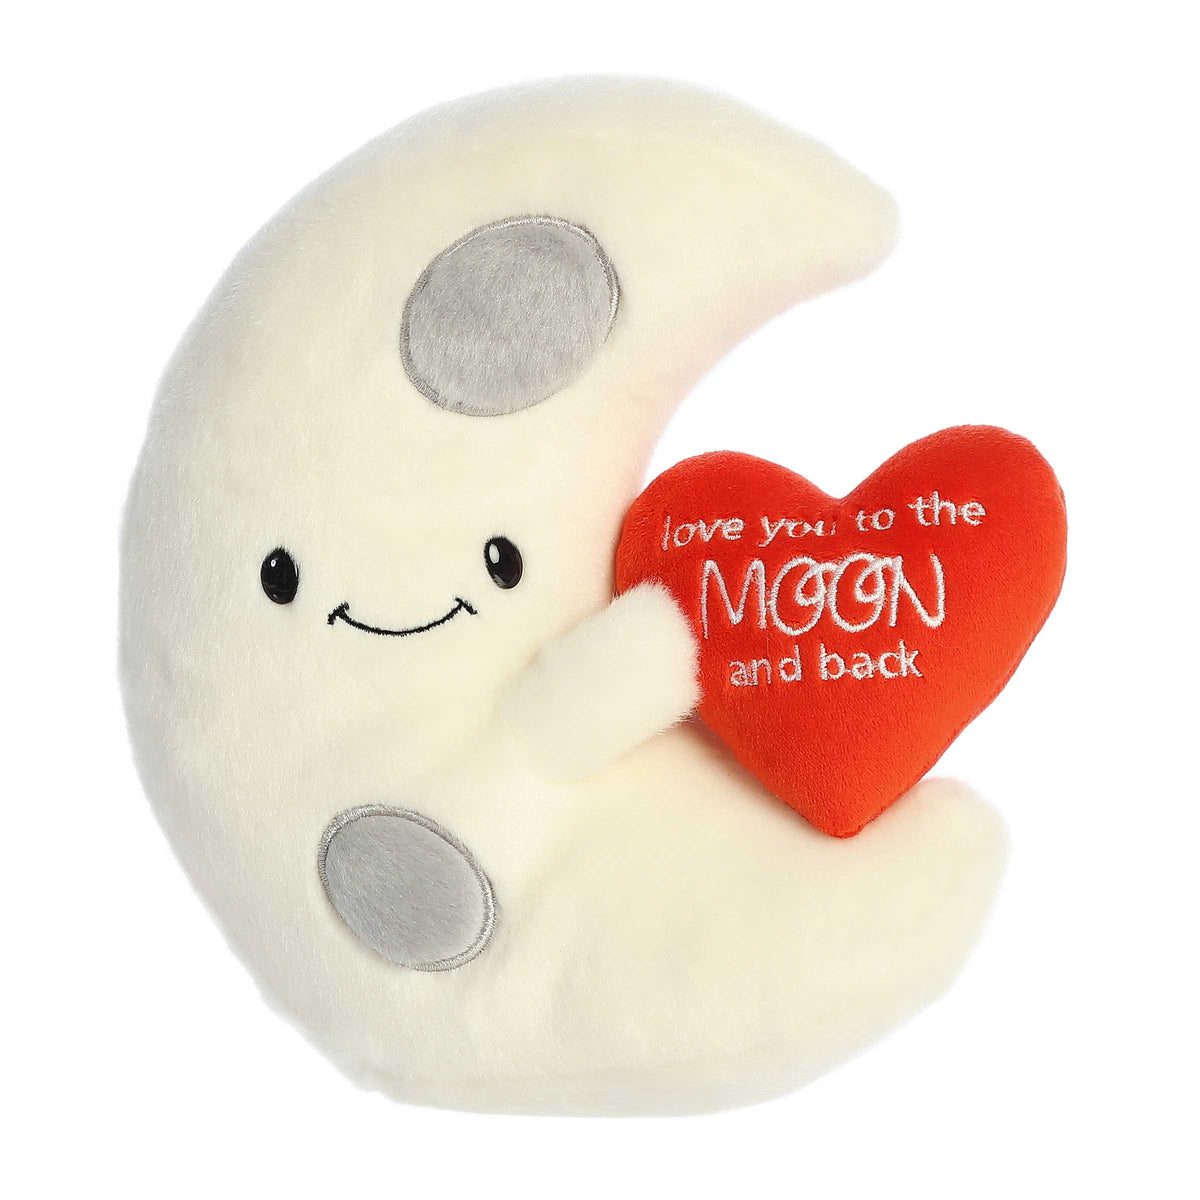 Crescent moon plush with a smiley face, holding a red heart with 'Love You To The Moon and Back', and featuring gray craters.